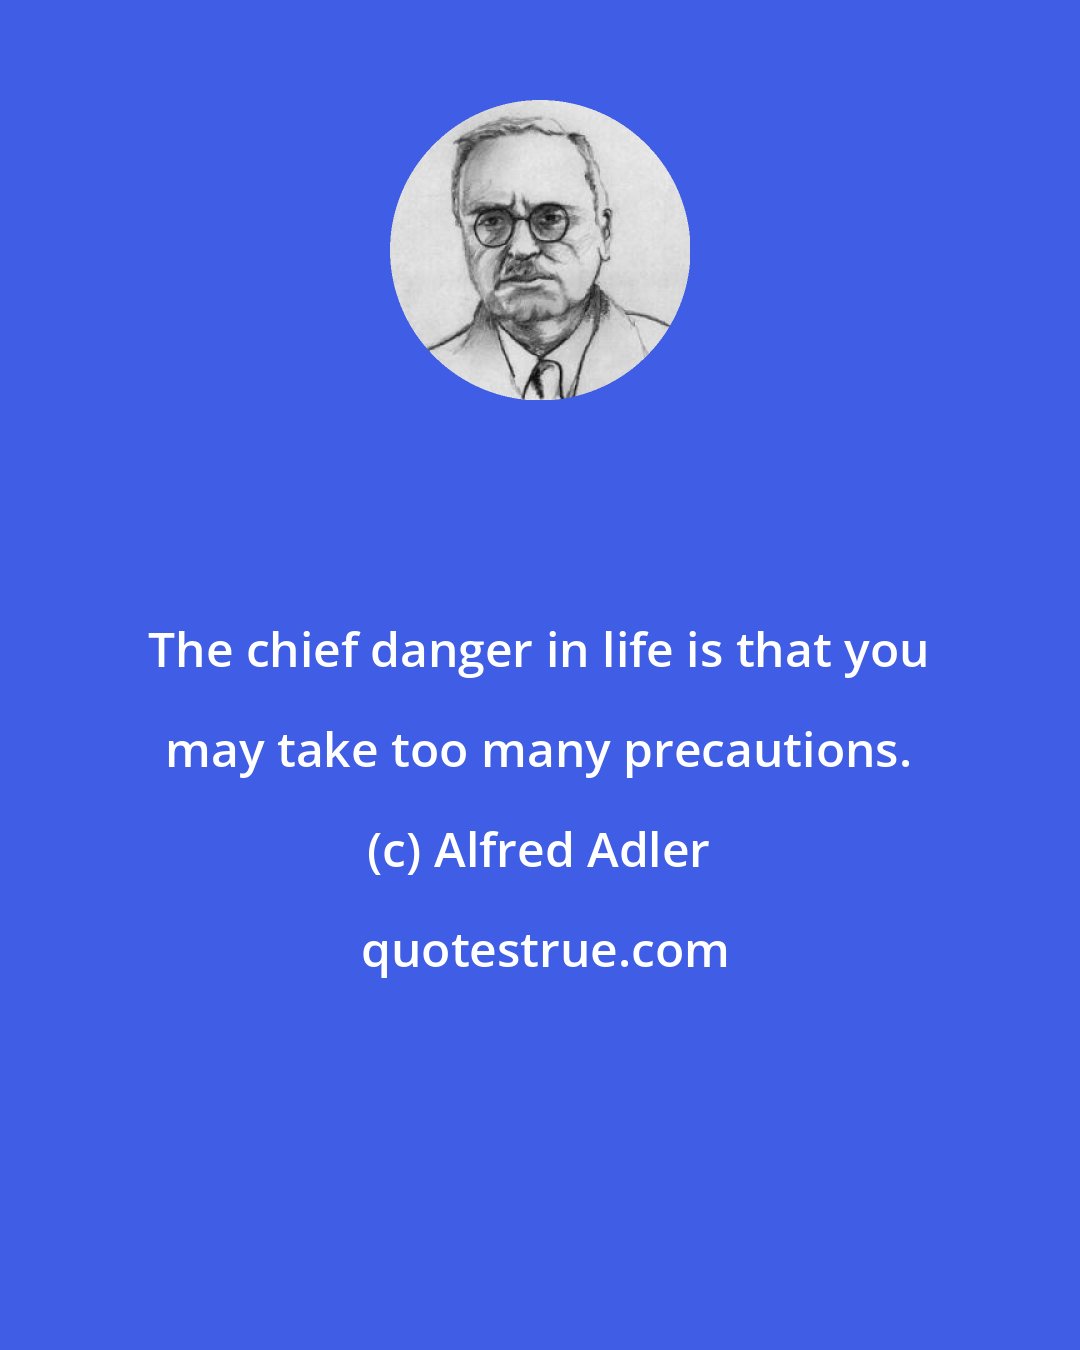 Alfred Adler: The chief danger in life is that you may take too many precautions.